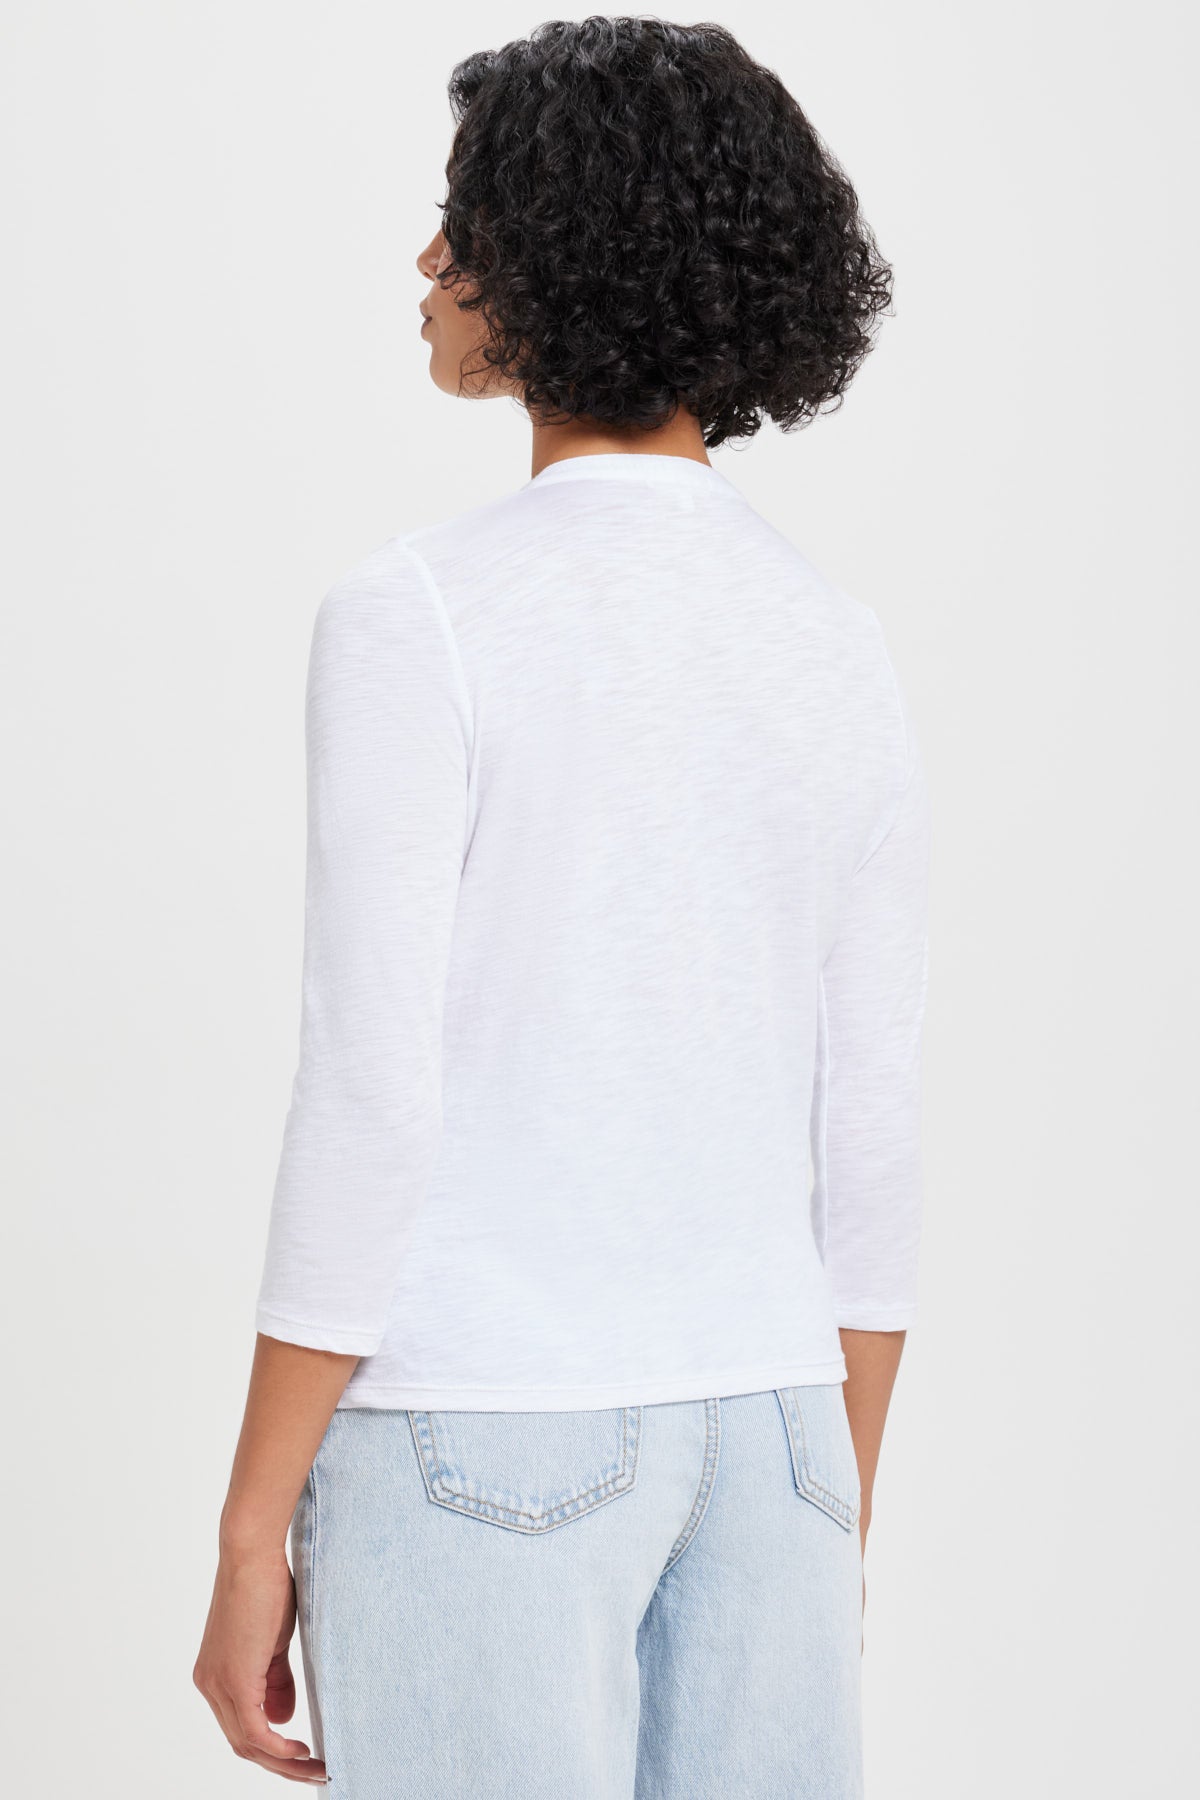 Honor Embroidered Henley - Goldie LeWinter